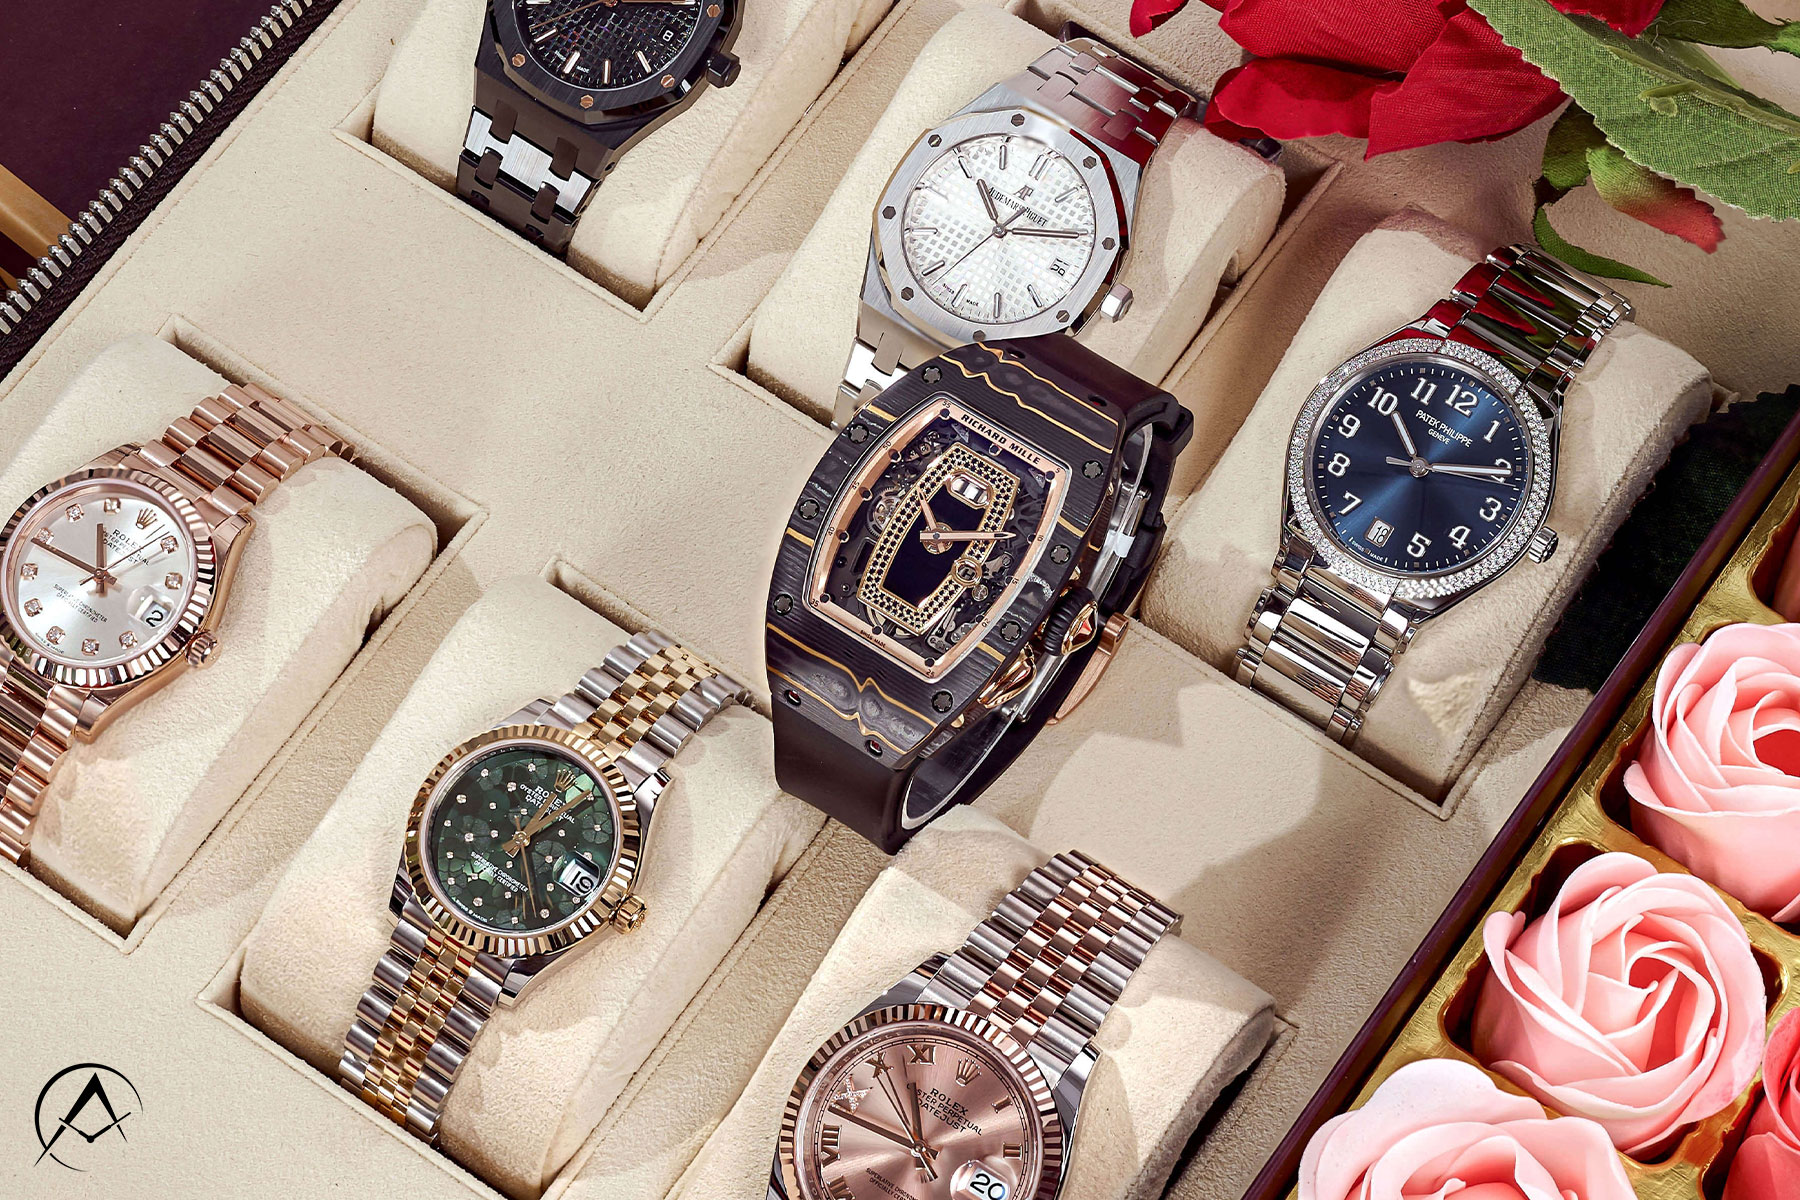 Watch Holder Displaying 7 Richard Mille, Rolex, Audemars Piguet, and Patek Philippe Luxury Timepieces Beside Pink and Red Roses